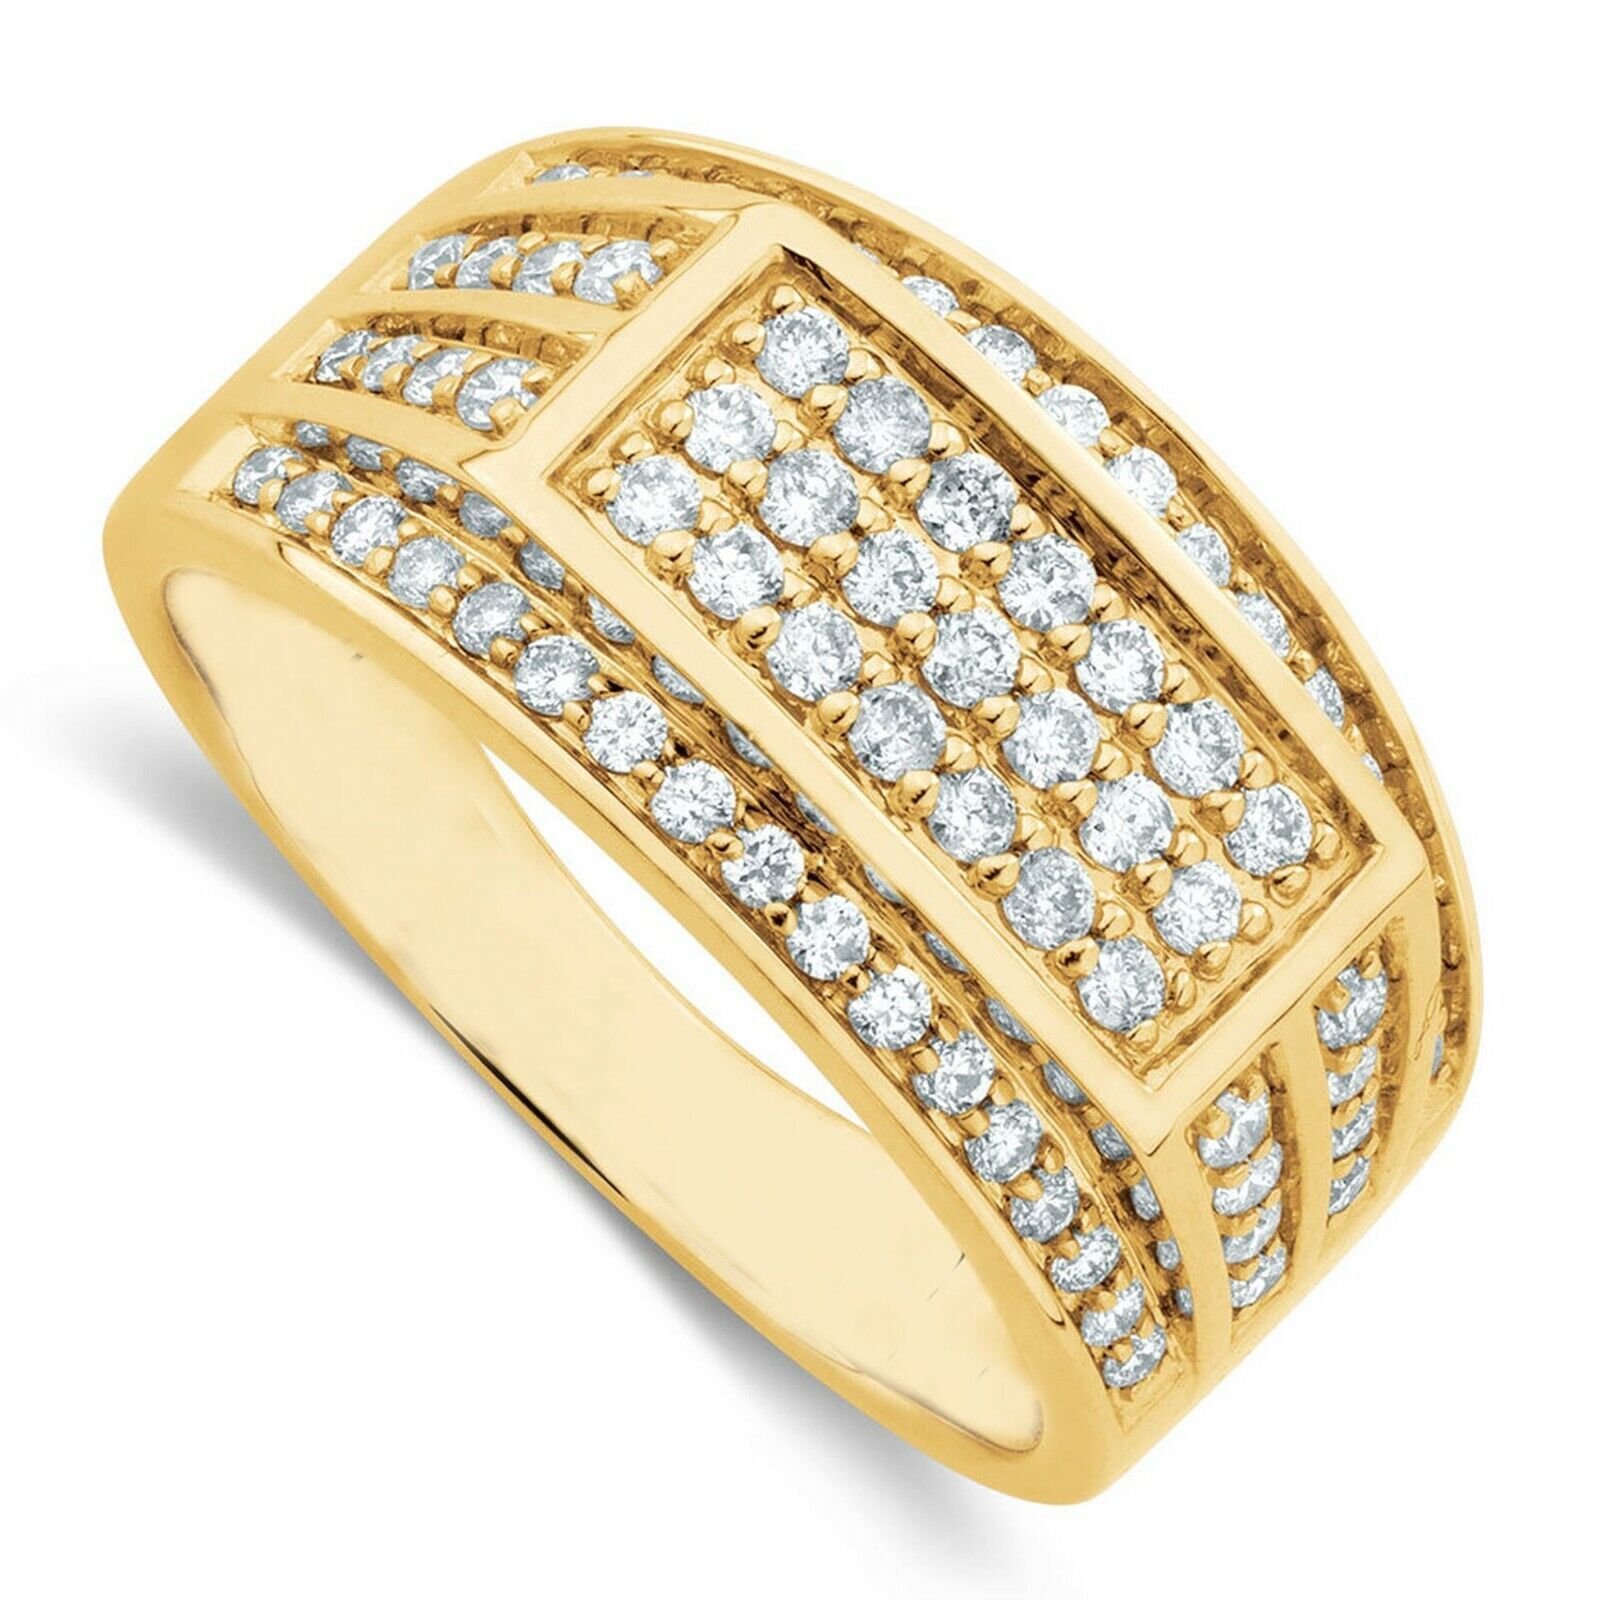 Primary image for Men 1.45Ct 14k Yellow Gold Plated Moissanite Pinky Ring Engagement Wedding Band